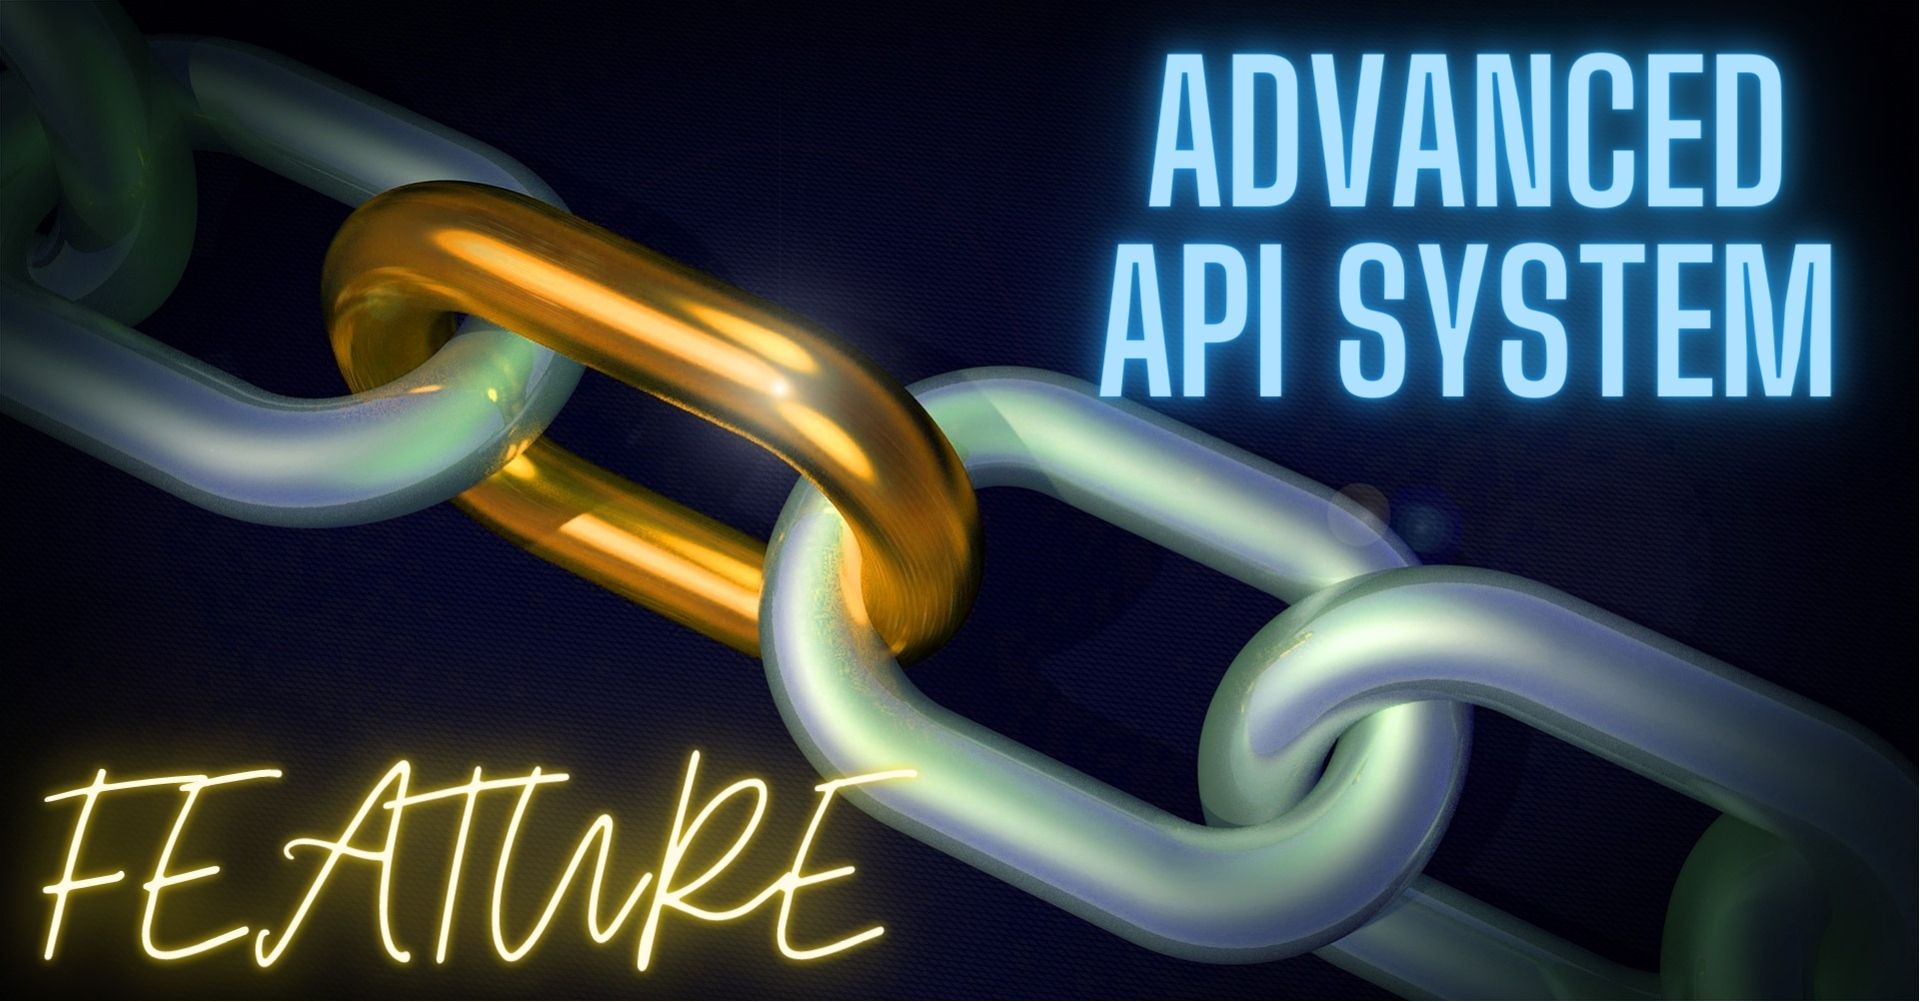 Advanced API System on the Featured URL Shortener Website